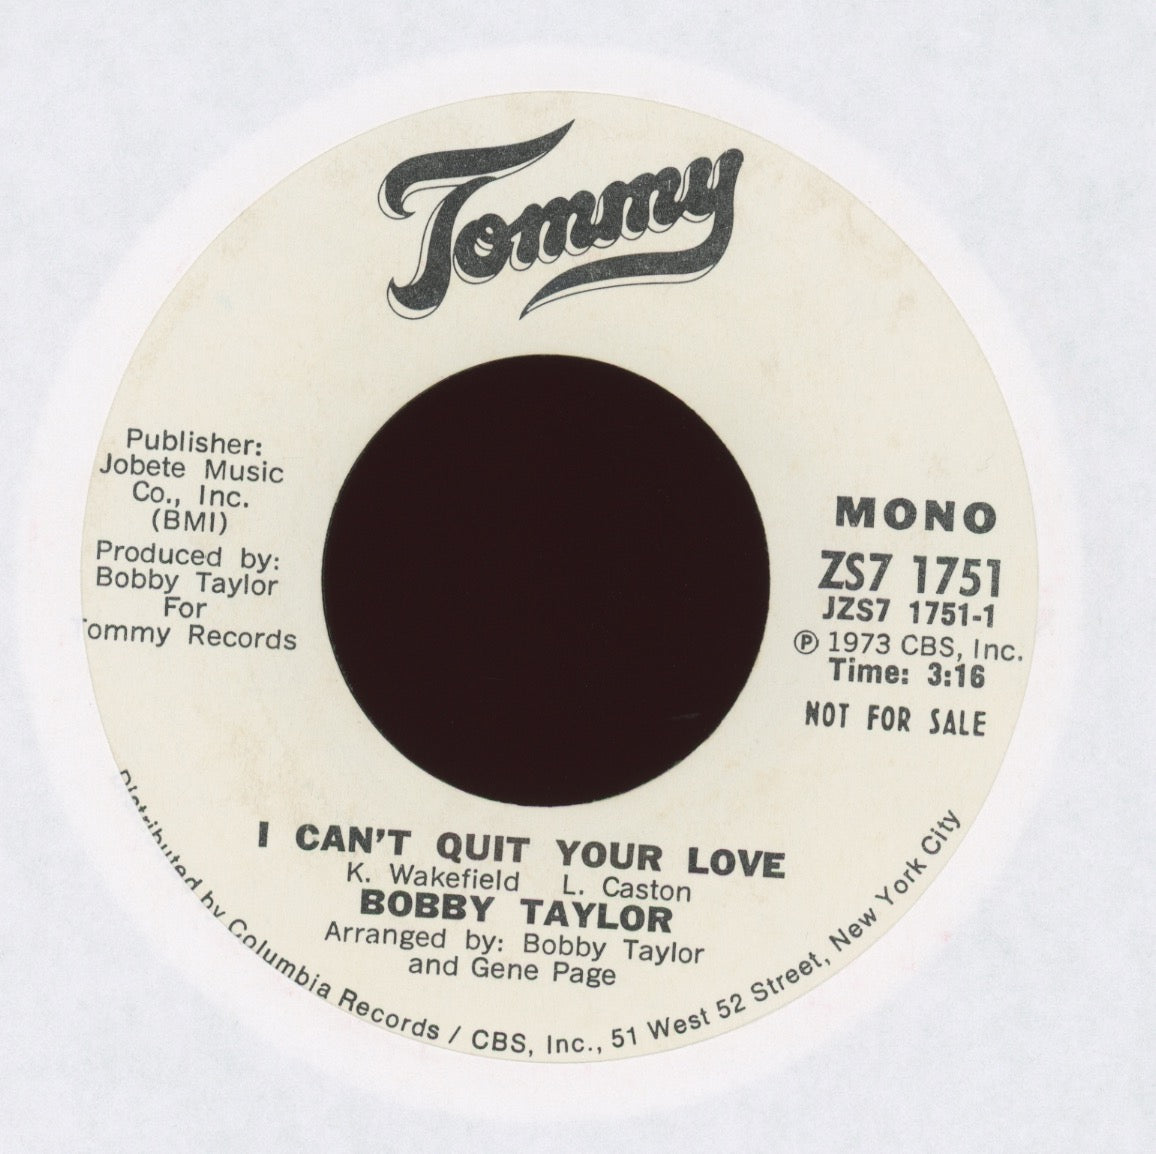 Bobby Taylor - I Can't Quit Your Love on Tommy Promo